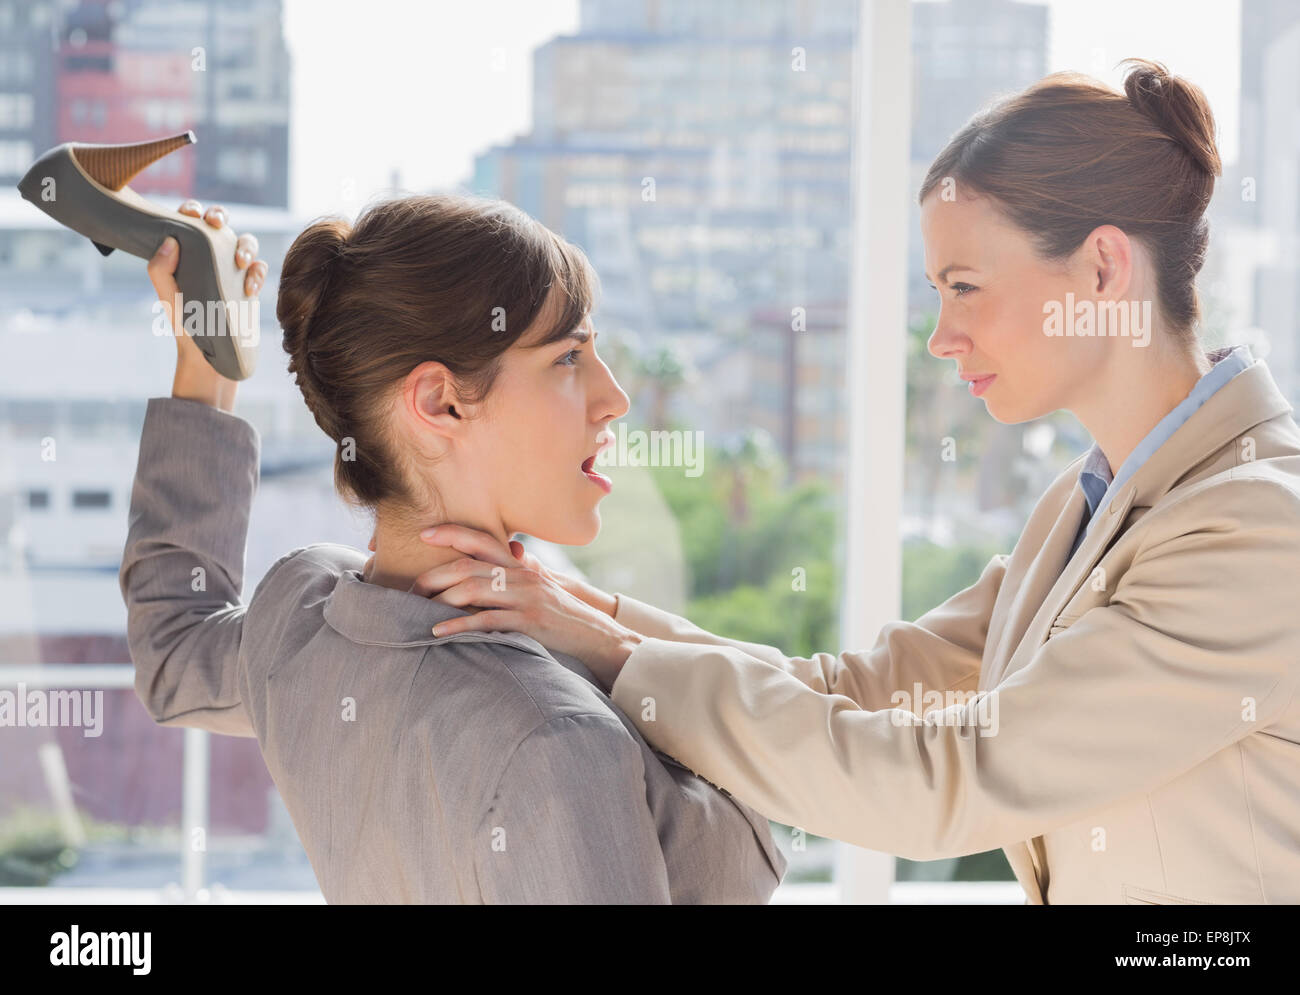 Businesswoman defending herself from her co worker strangling her Stock Photo